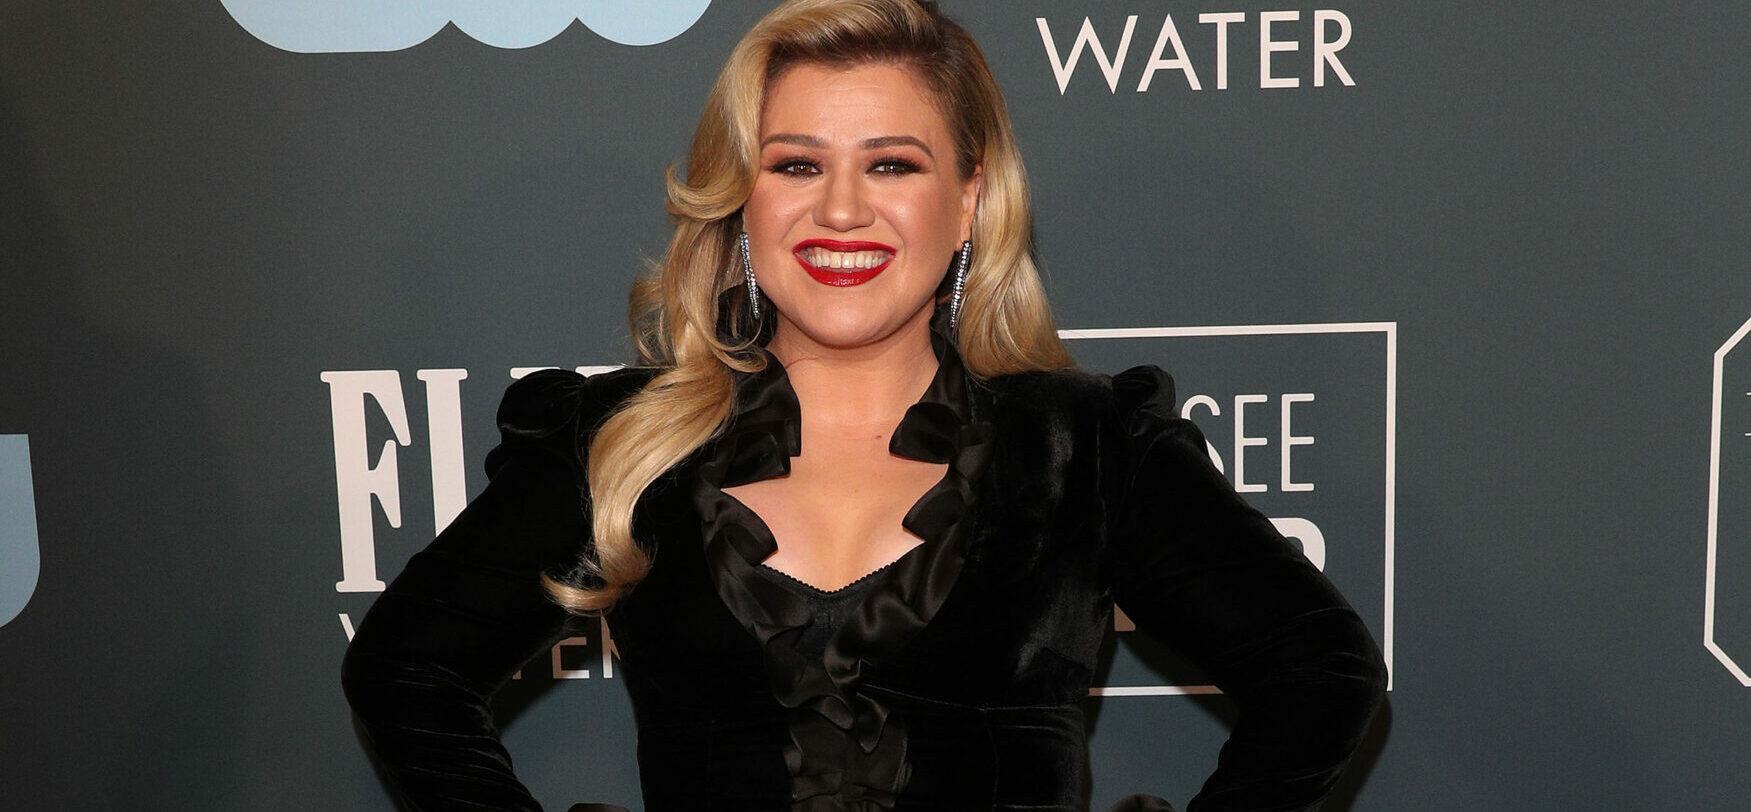 Kelly Clarkson Files Restraining Order Against ‘Large, Imposing’ Man Who Showed Up In Semi-Truck